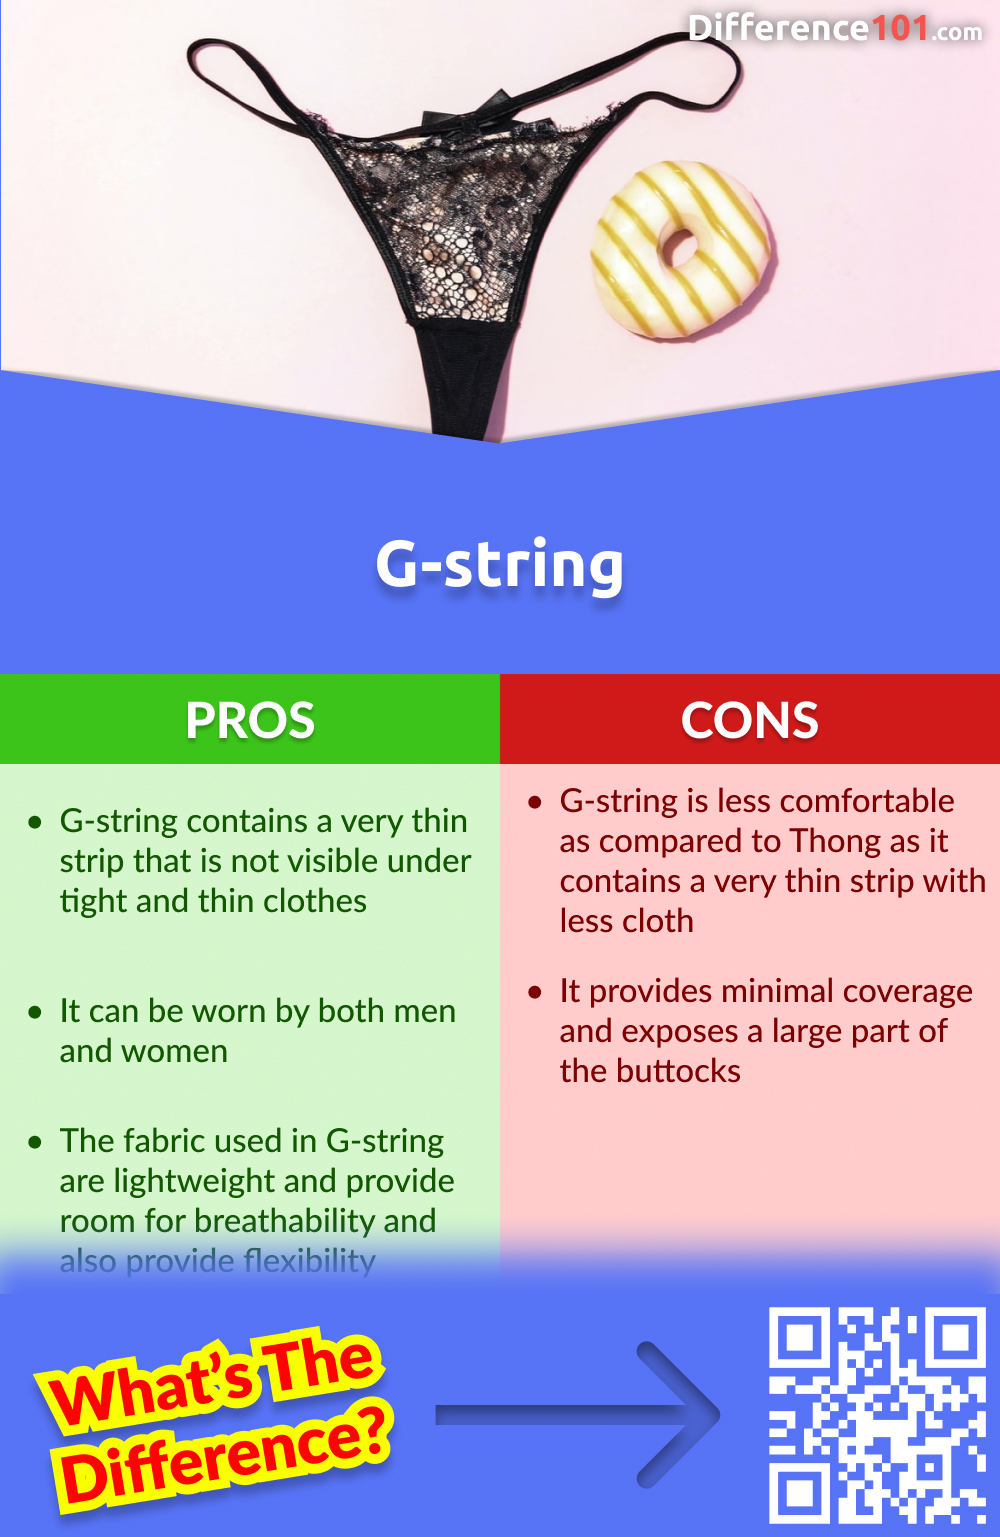 Pros and cons of G-string